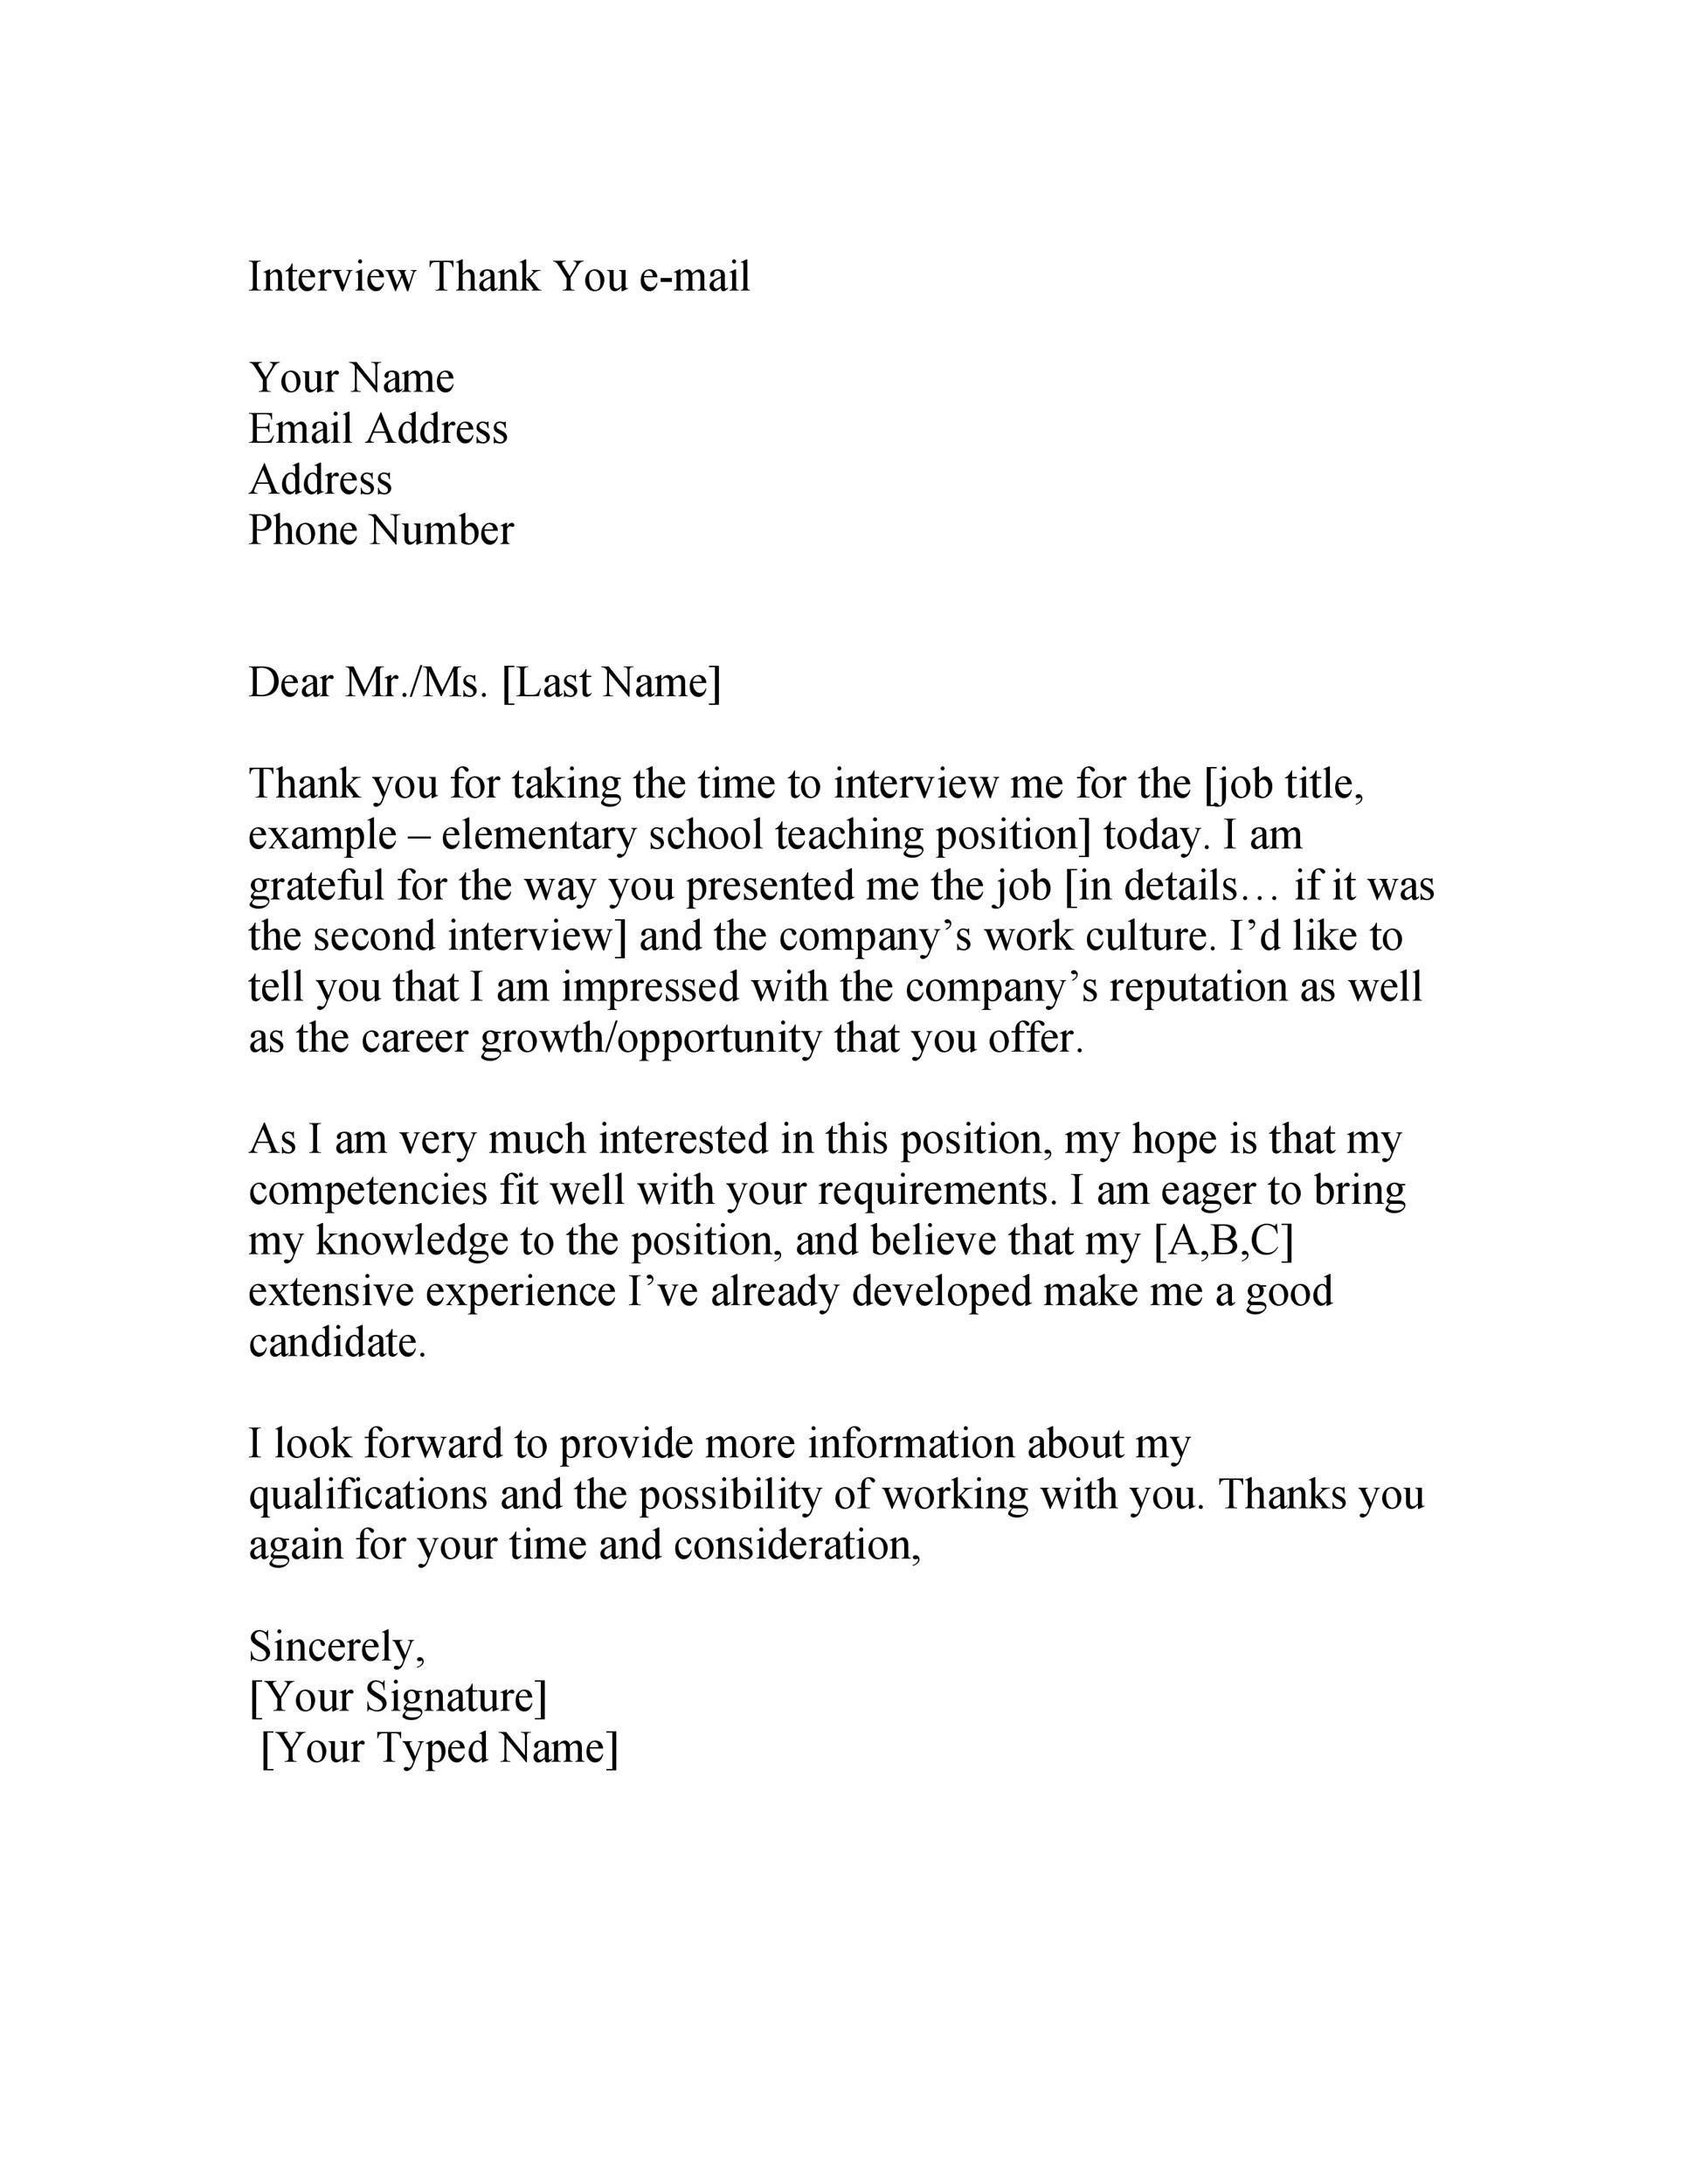 Thank You Letter For Interview Opportunity from templatelab.com